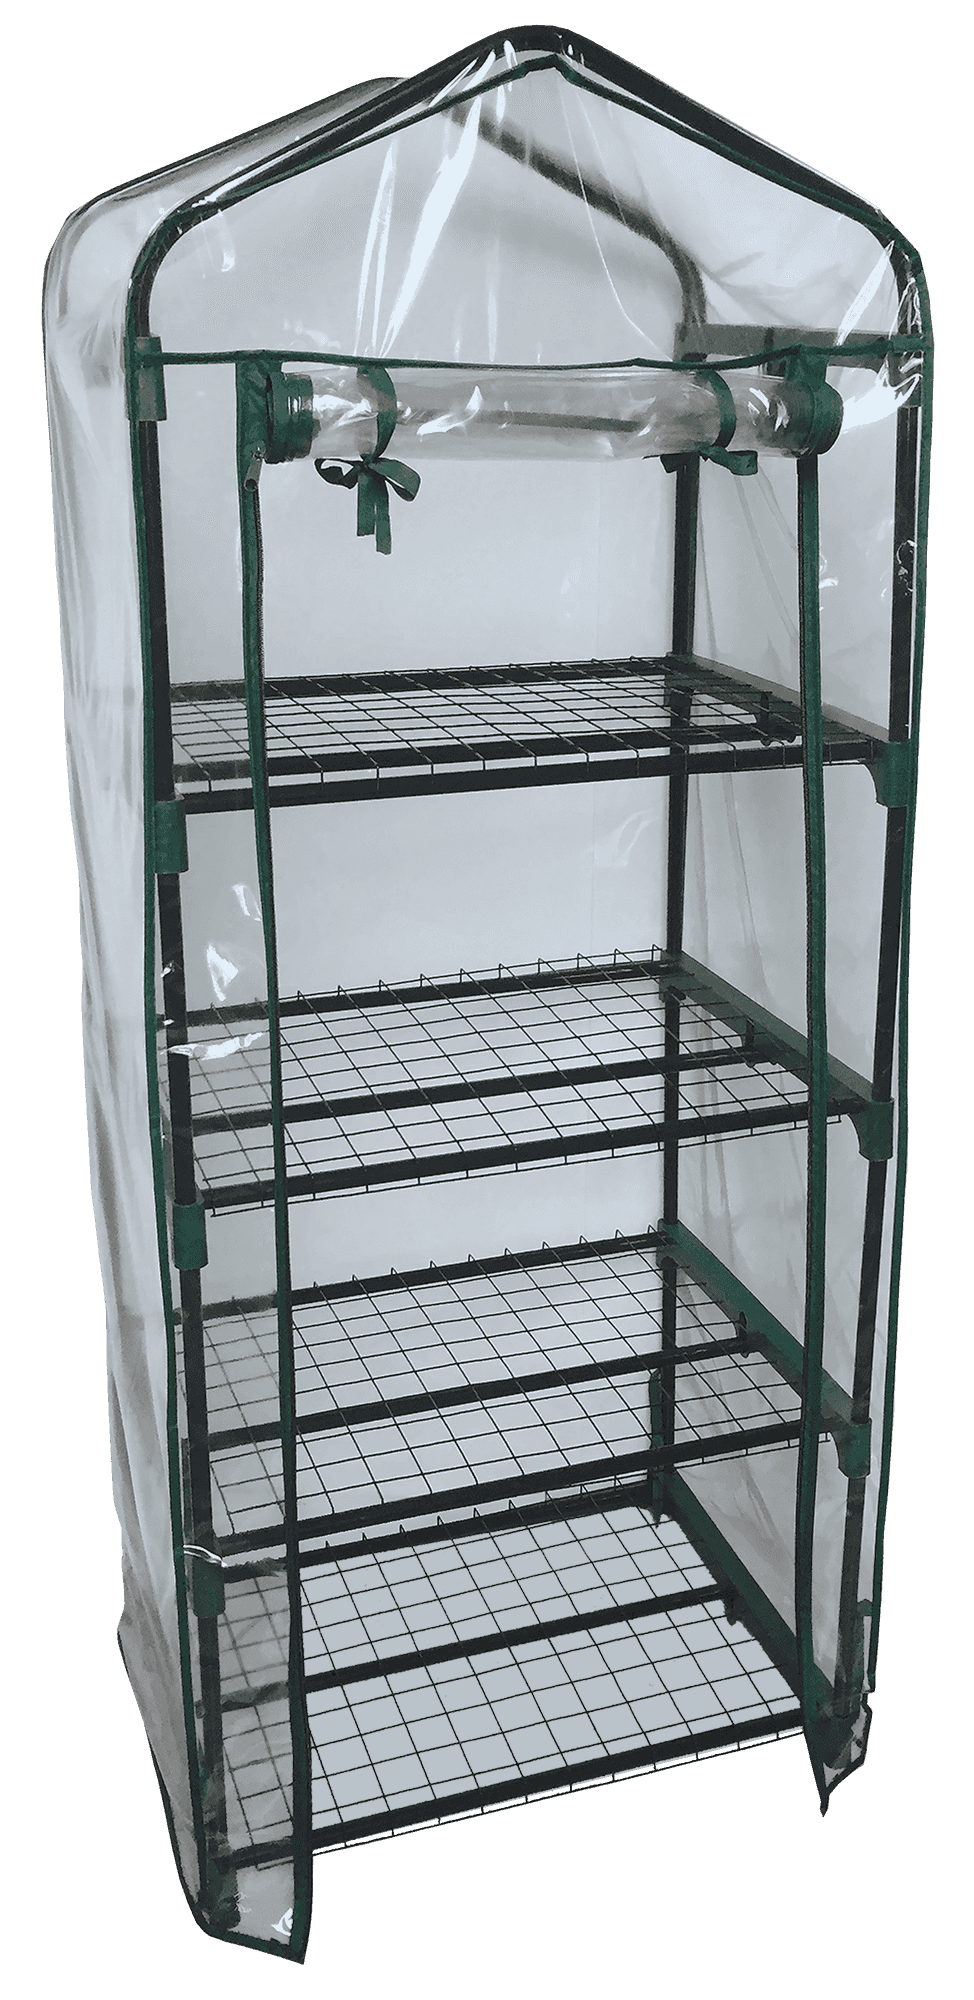 Miracle-Gro 1-ft L x 2-ft W x 5-ft H Transparent Greenhouse Kit in Clear | 70524